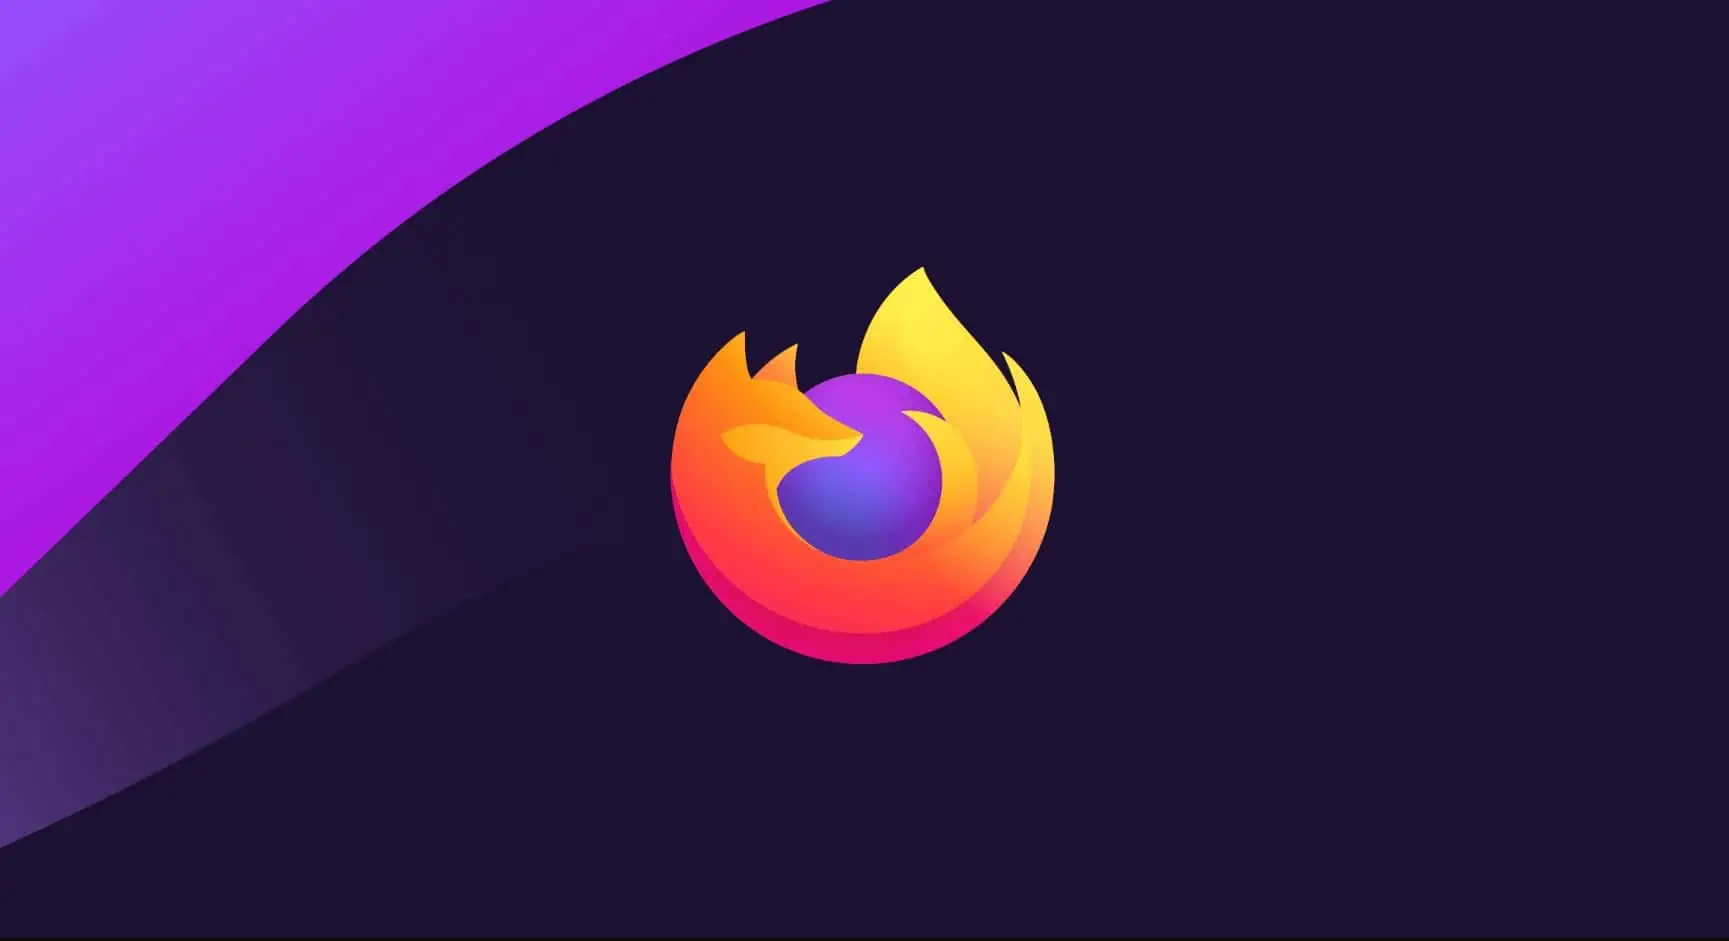 Firefox 84 brings native Apple Silicon support on macOS